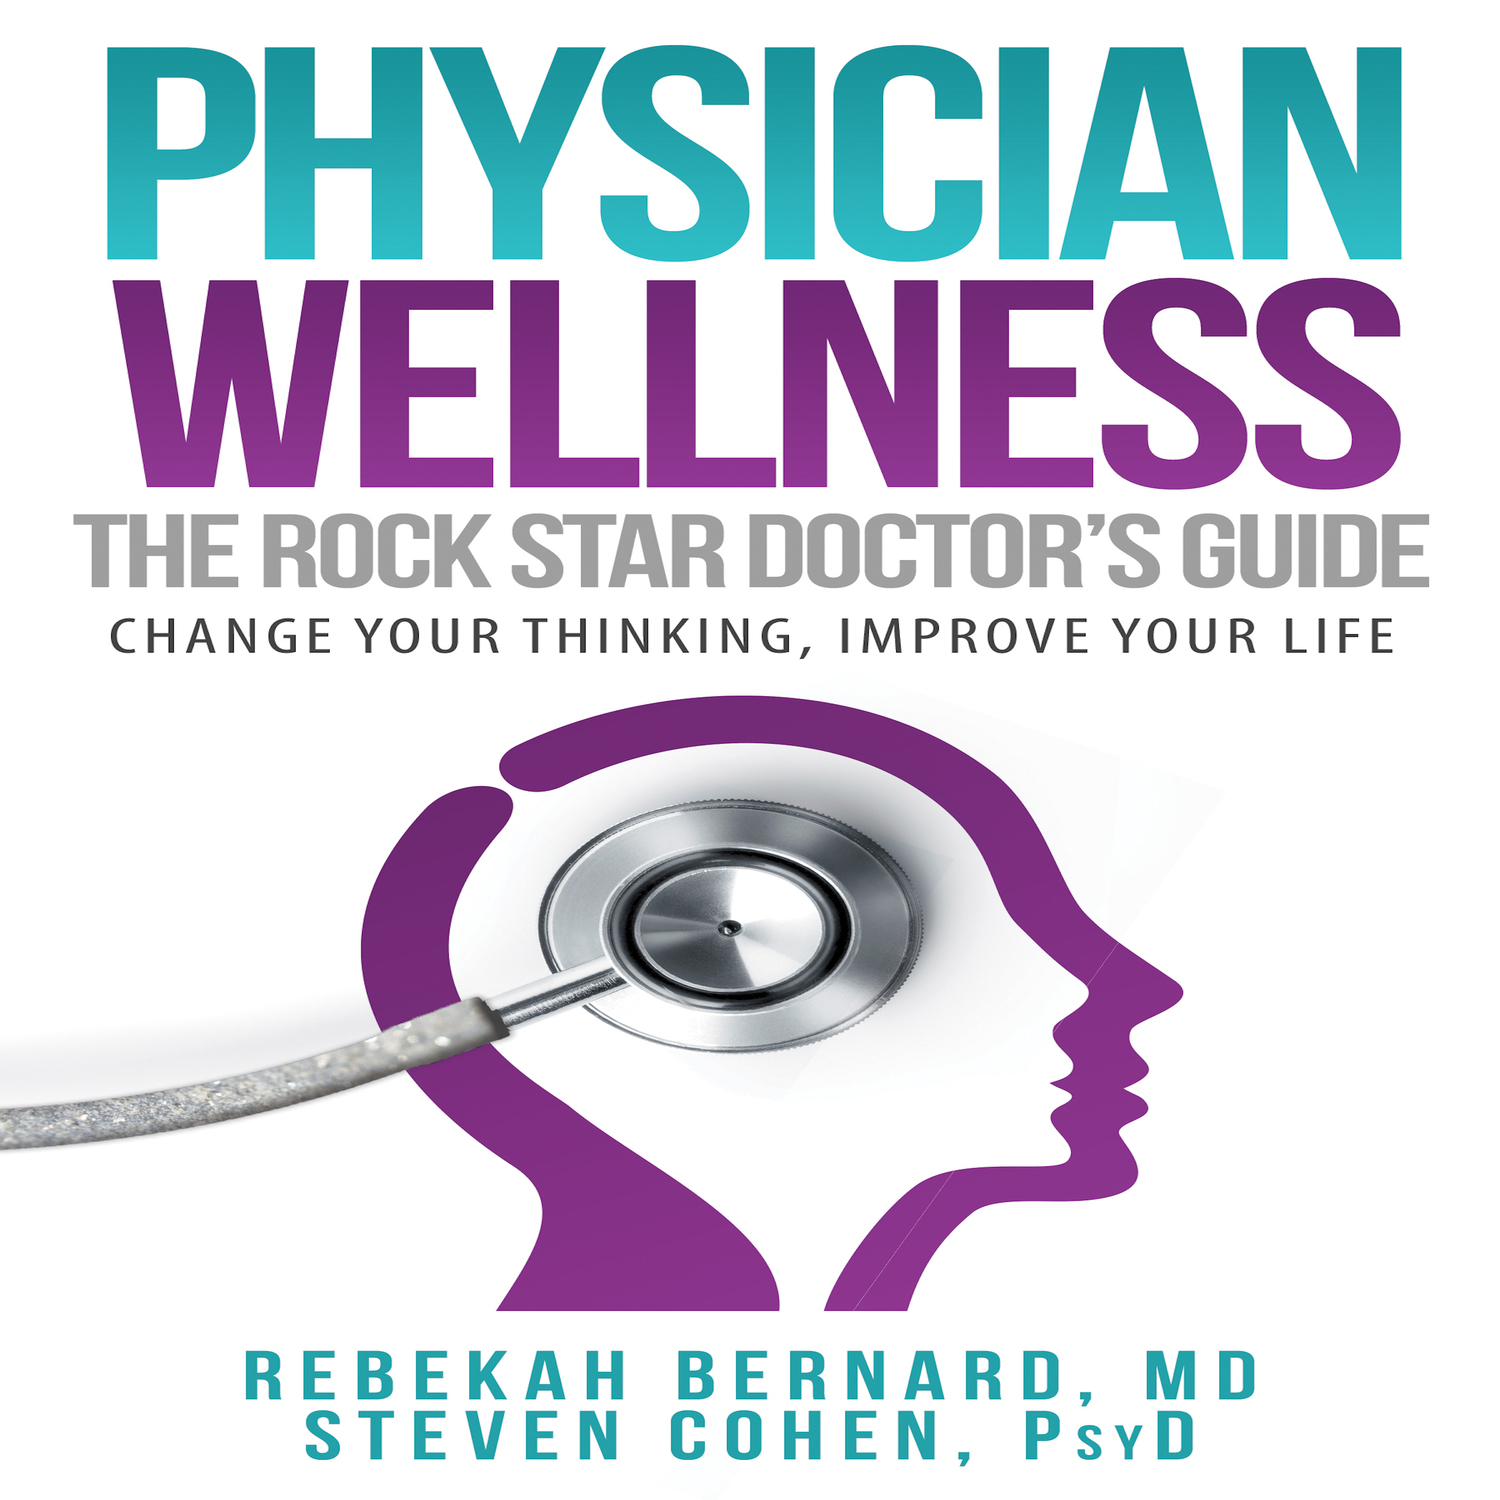 Gallery Photo of Physician Wellness: The Rock Star Doctor's Guide teaches doctors how to use psychology to improve their medical practice and their lives.